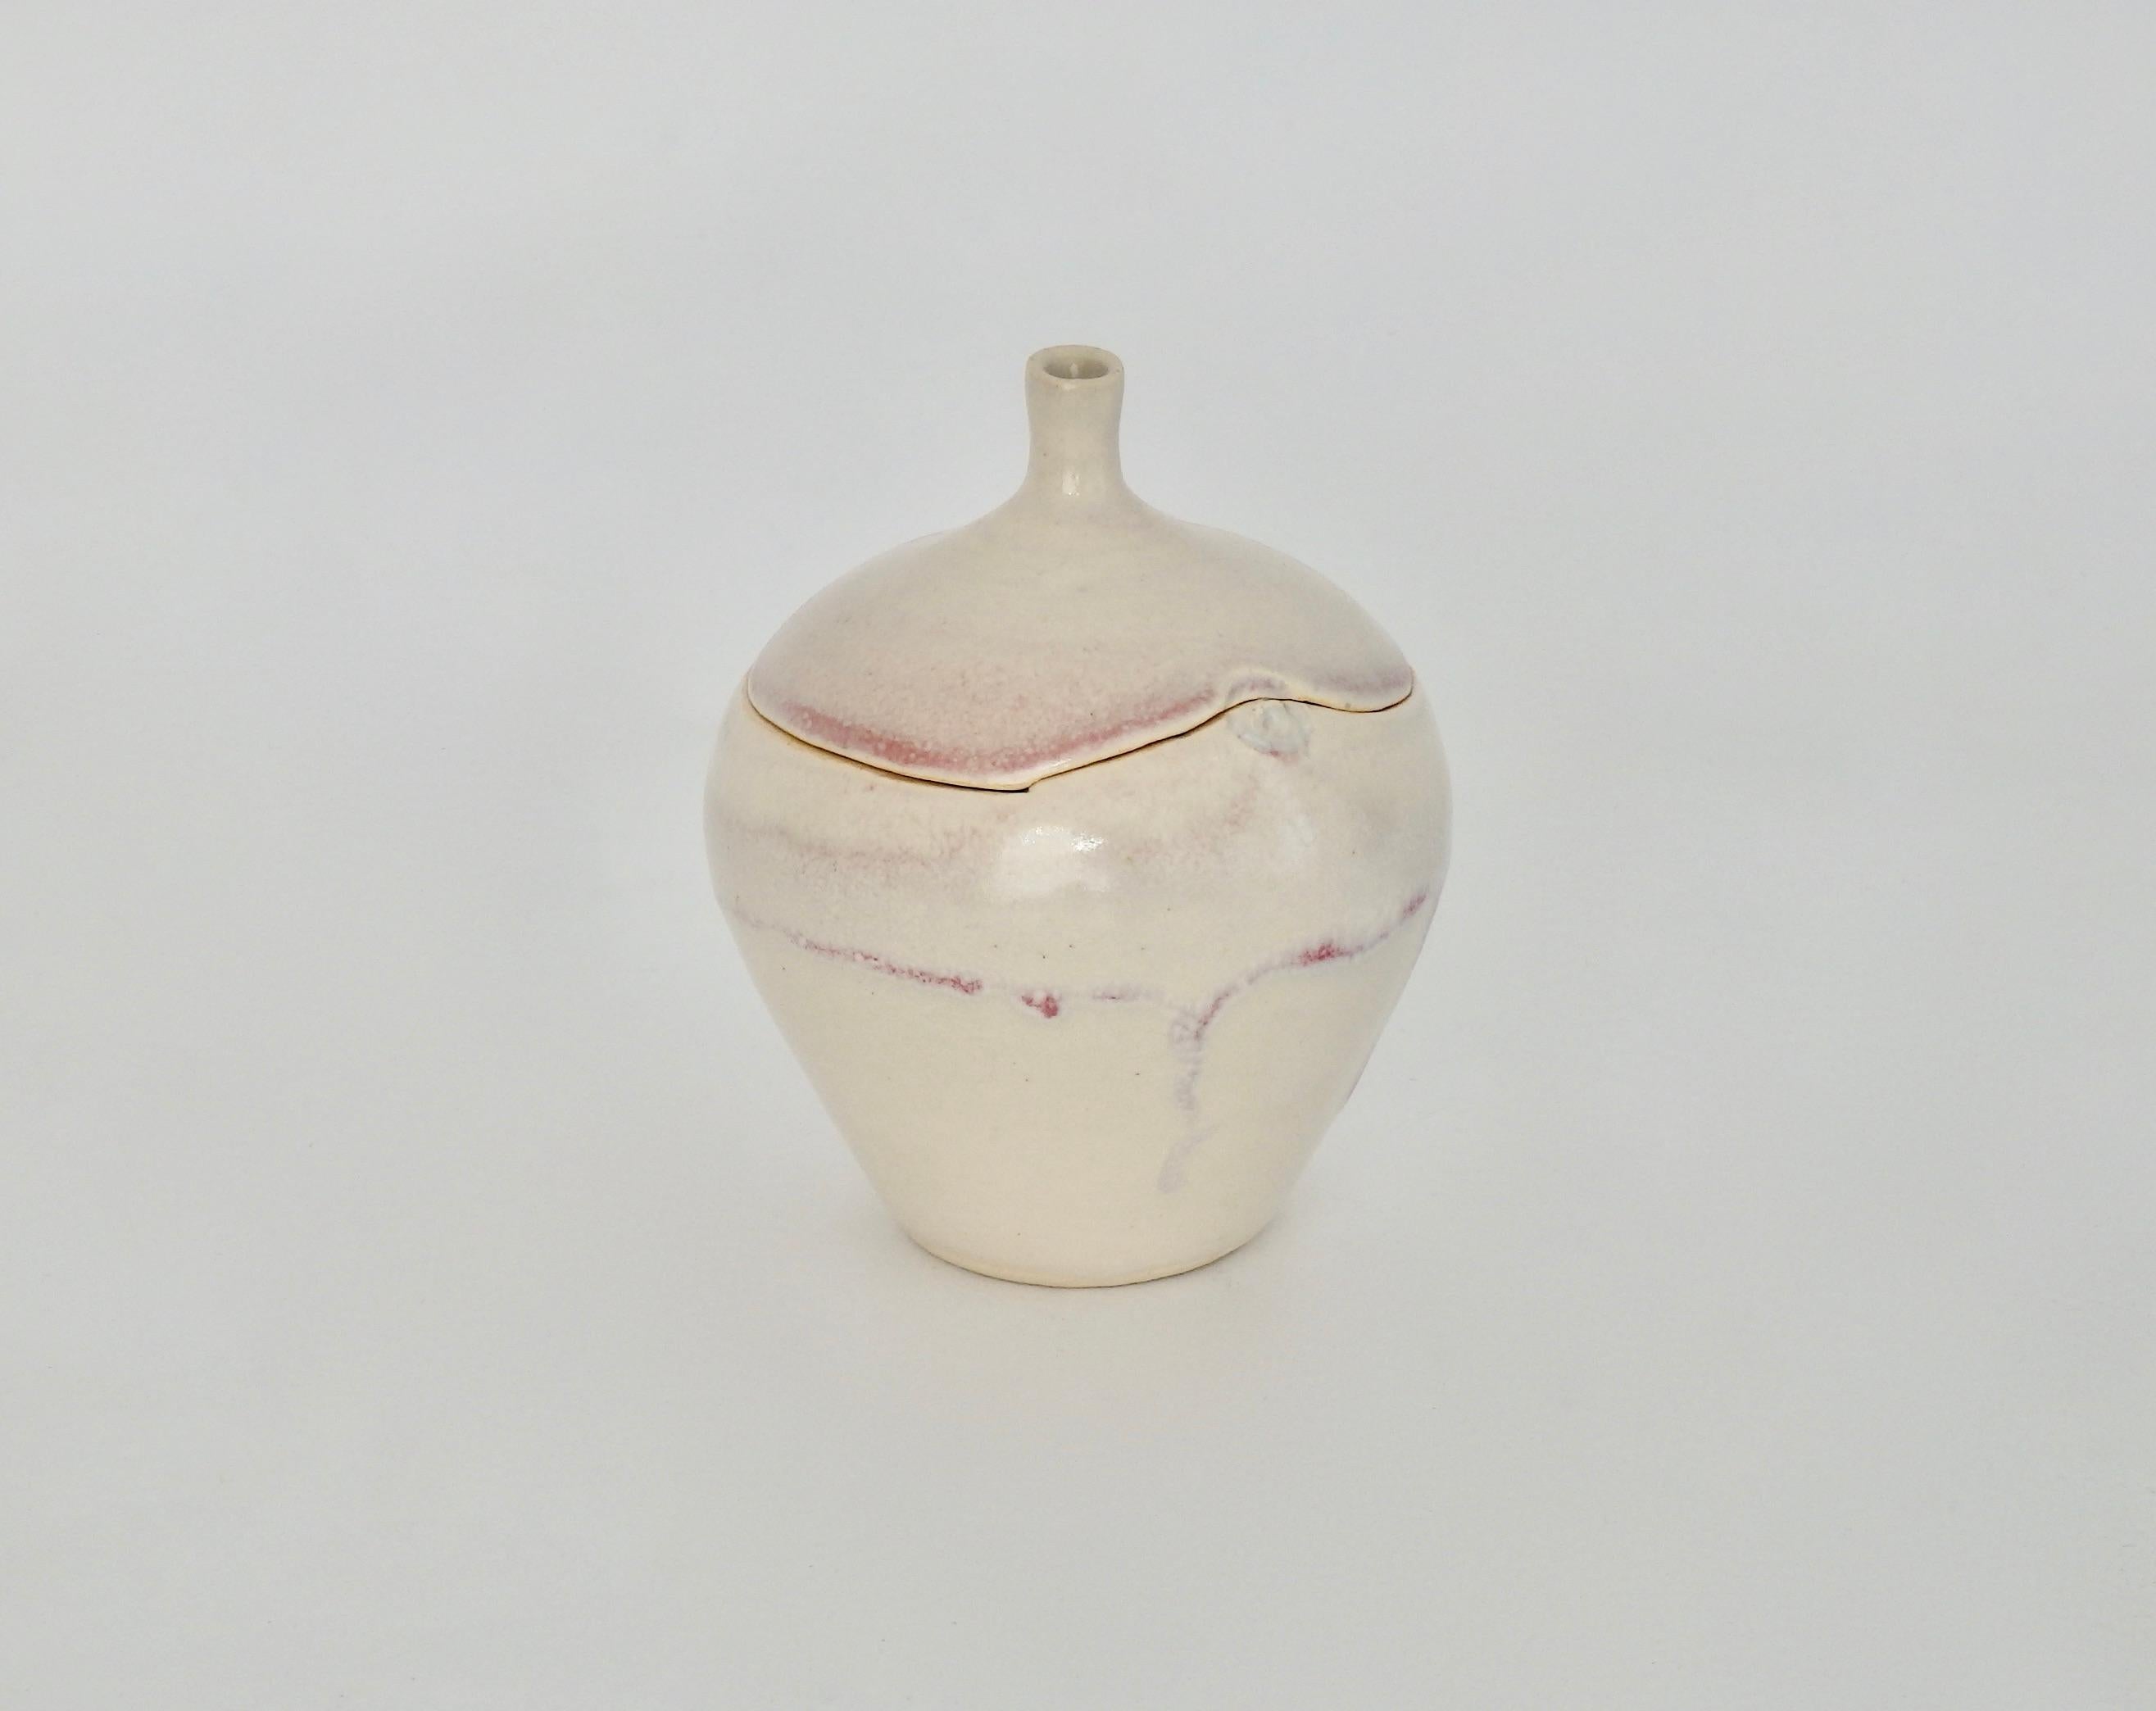 Charming ceramic apple sculpture with a rich cream and red high glaze.